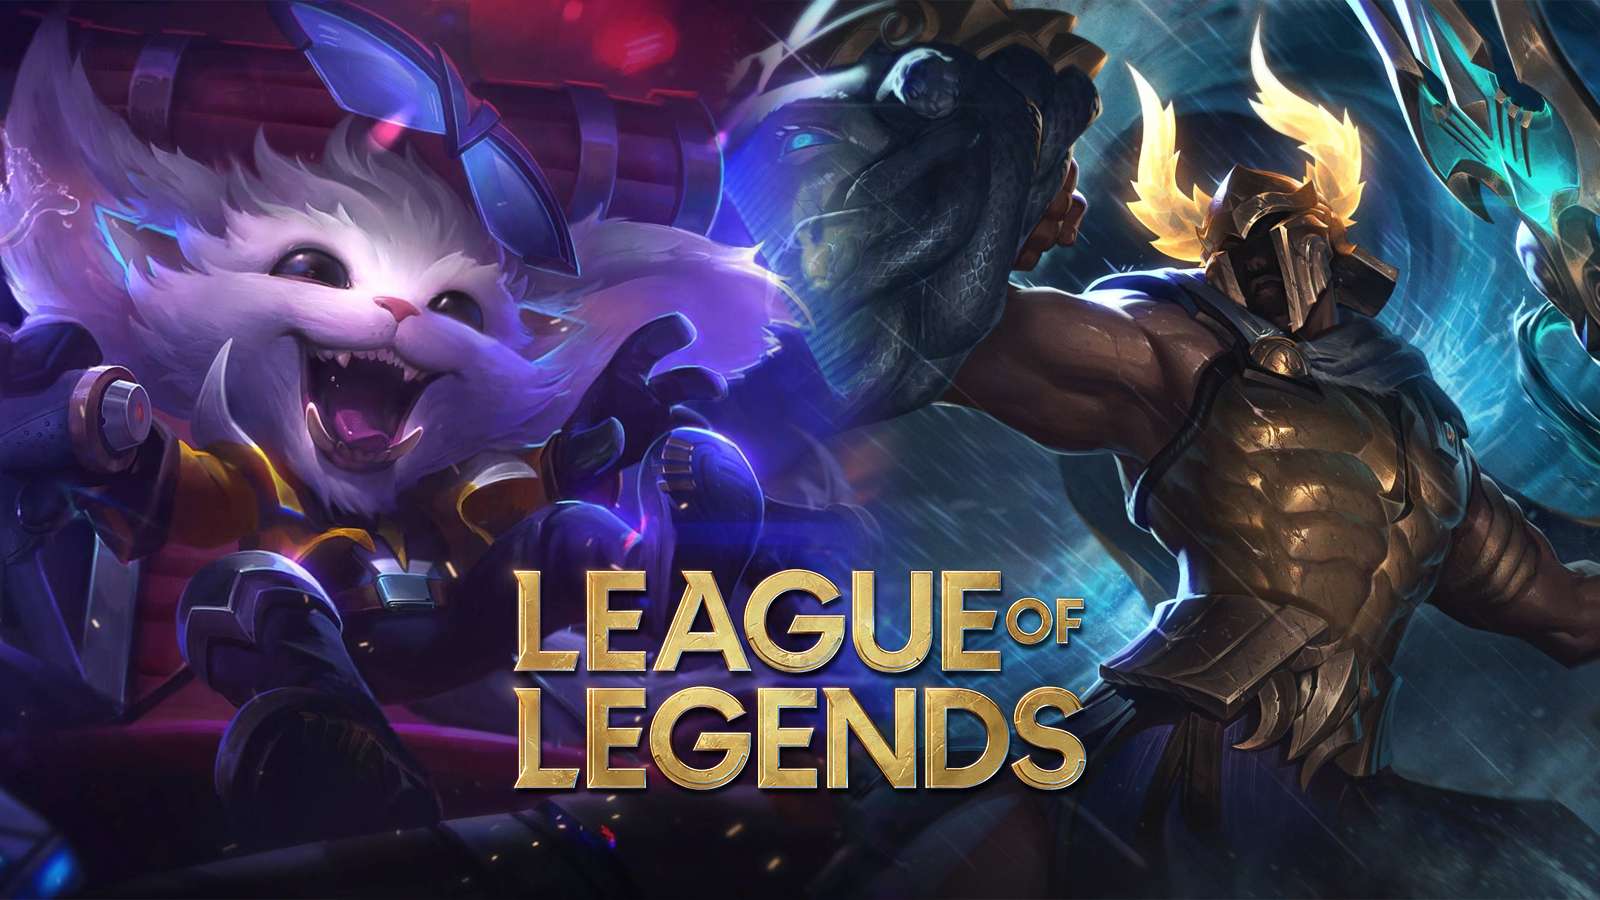 Super Galaxy Gnar and Perseus Pantheon in League of Legends